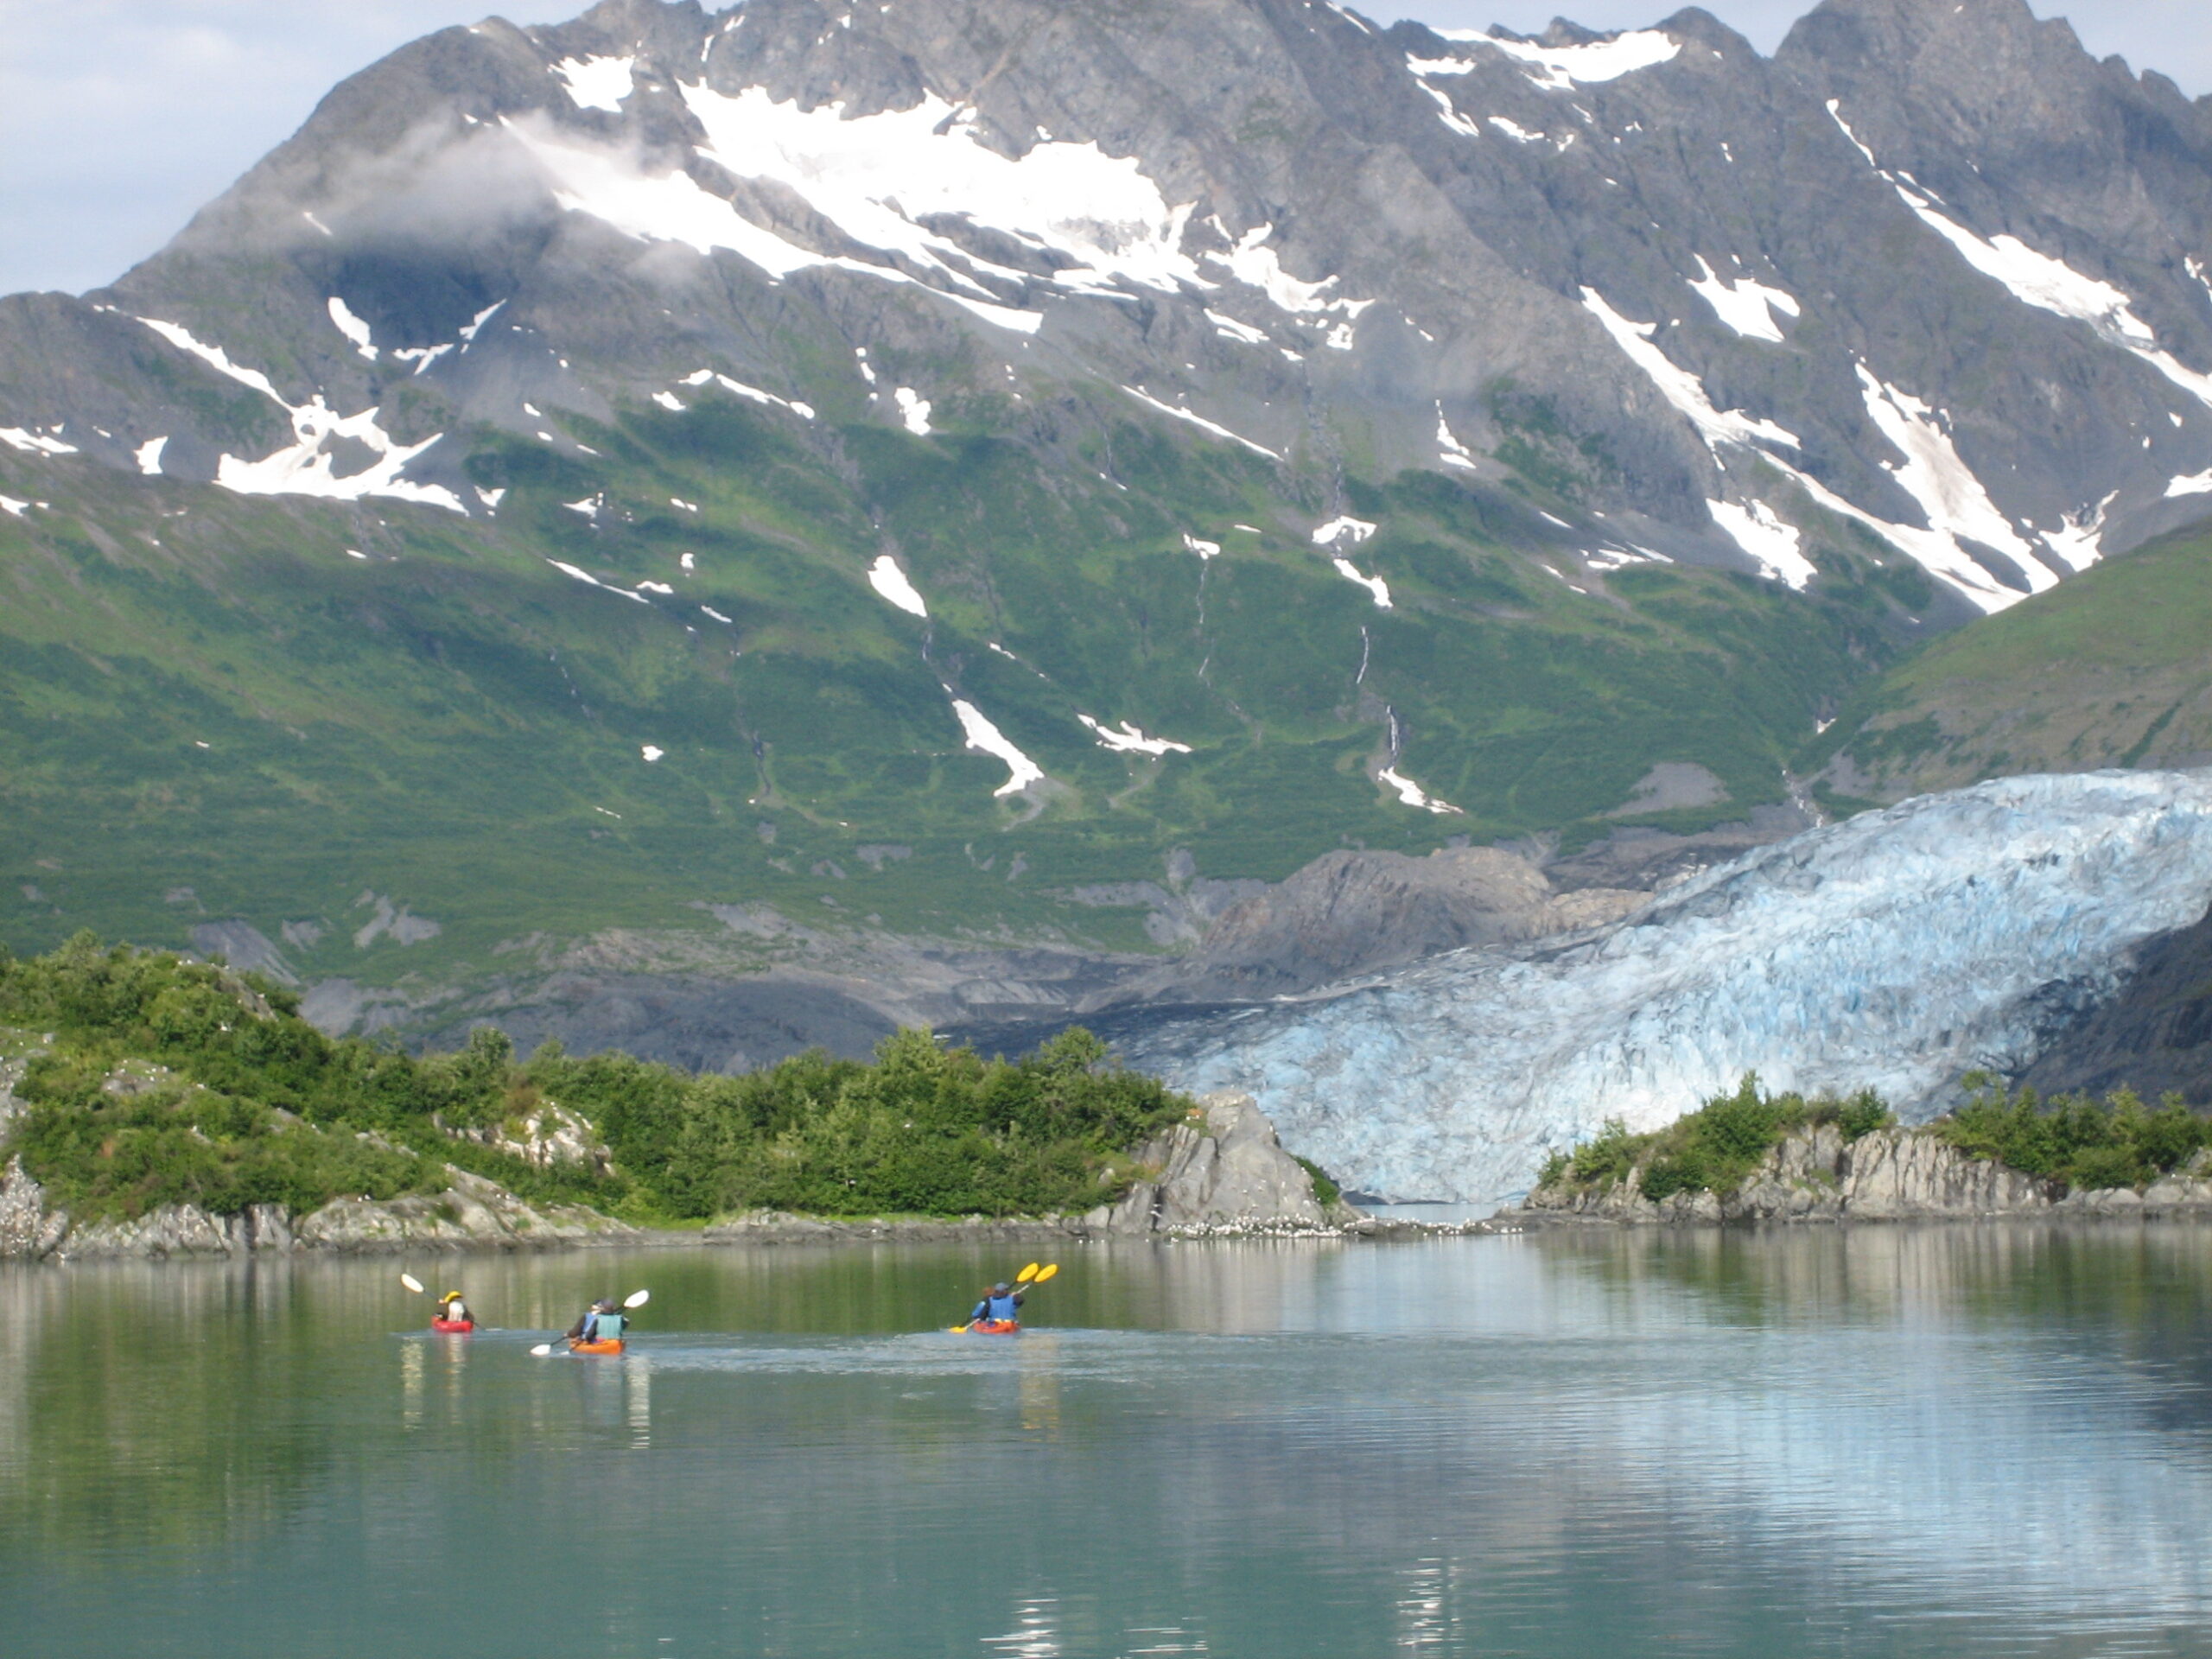 Kayaks in front of amazing scenery with a glacier in the background